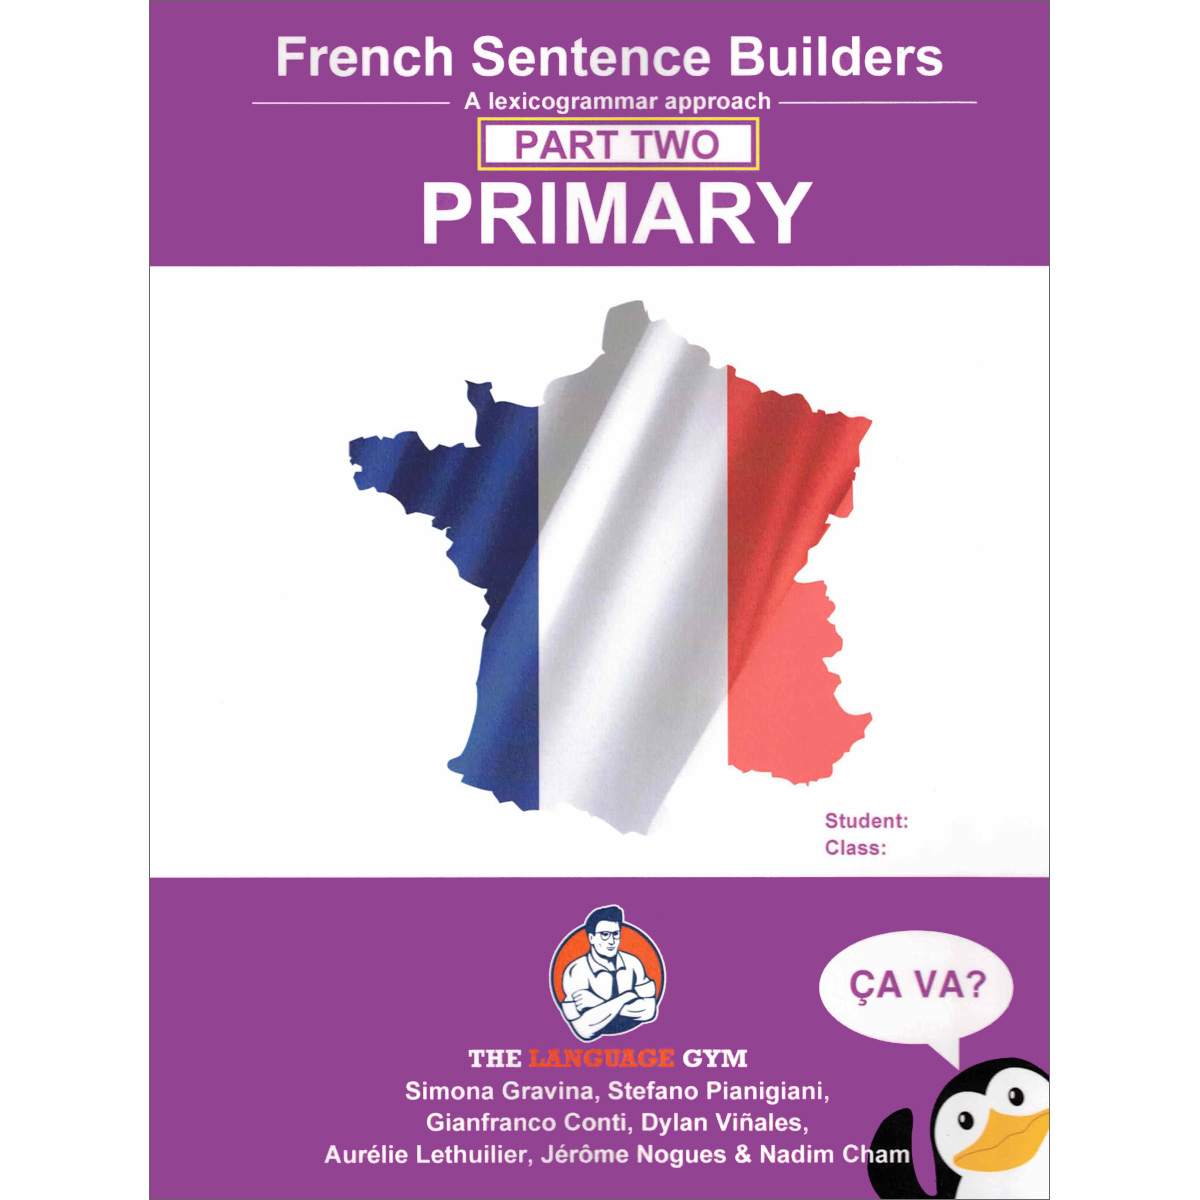 French Sentence Builders - Primary (Part Two)